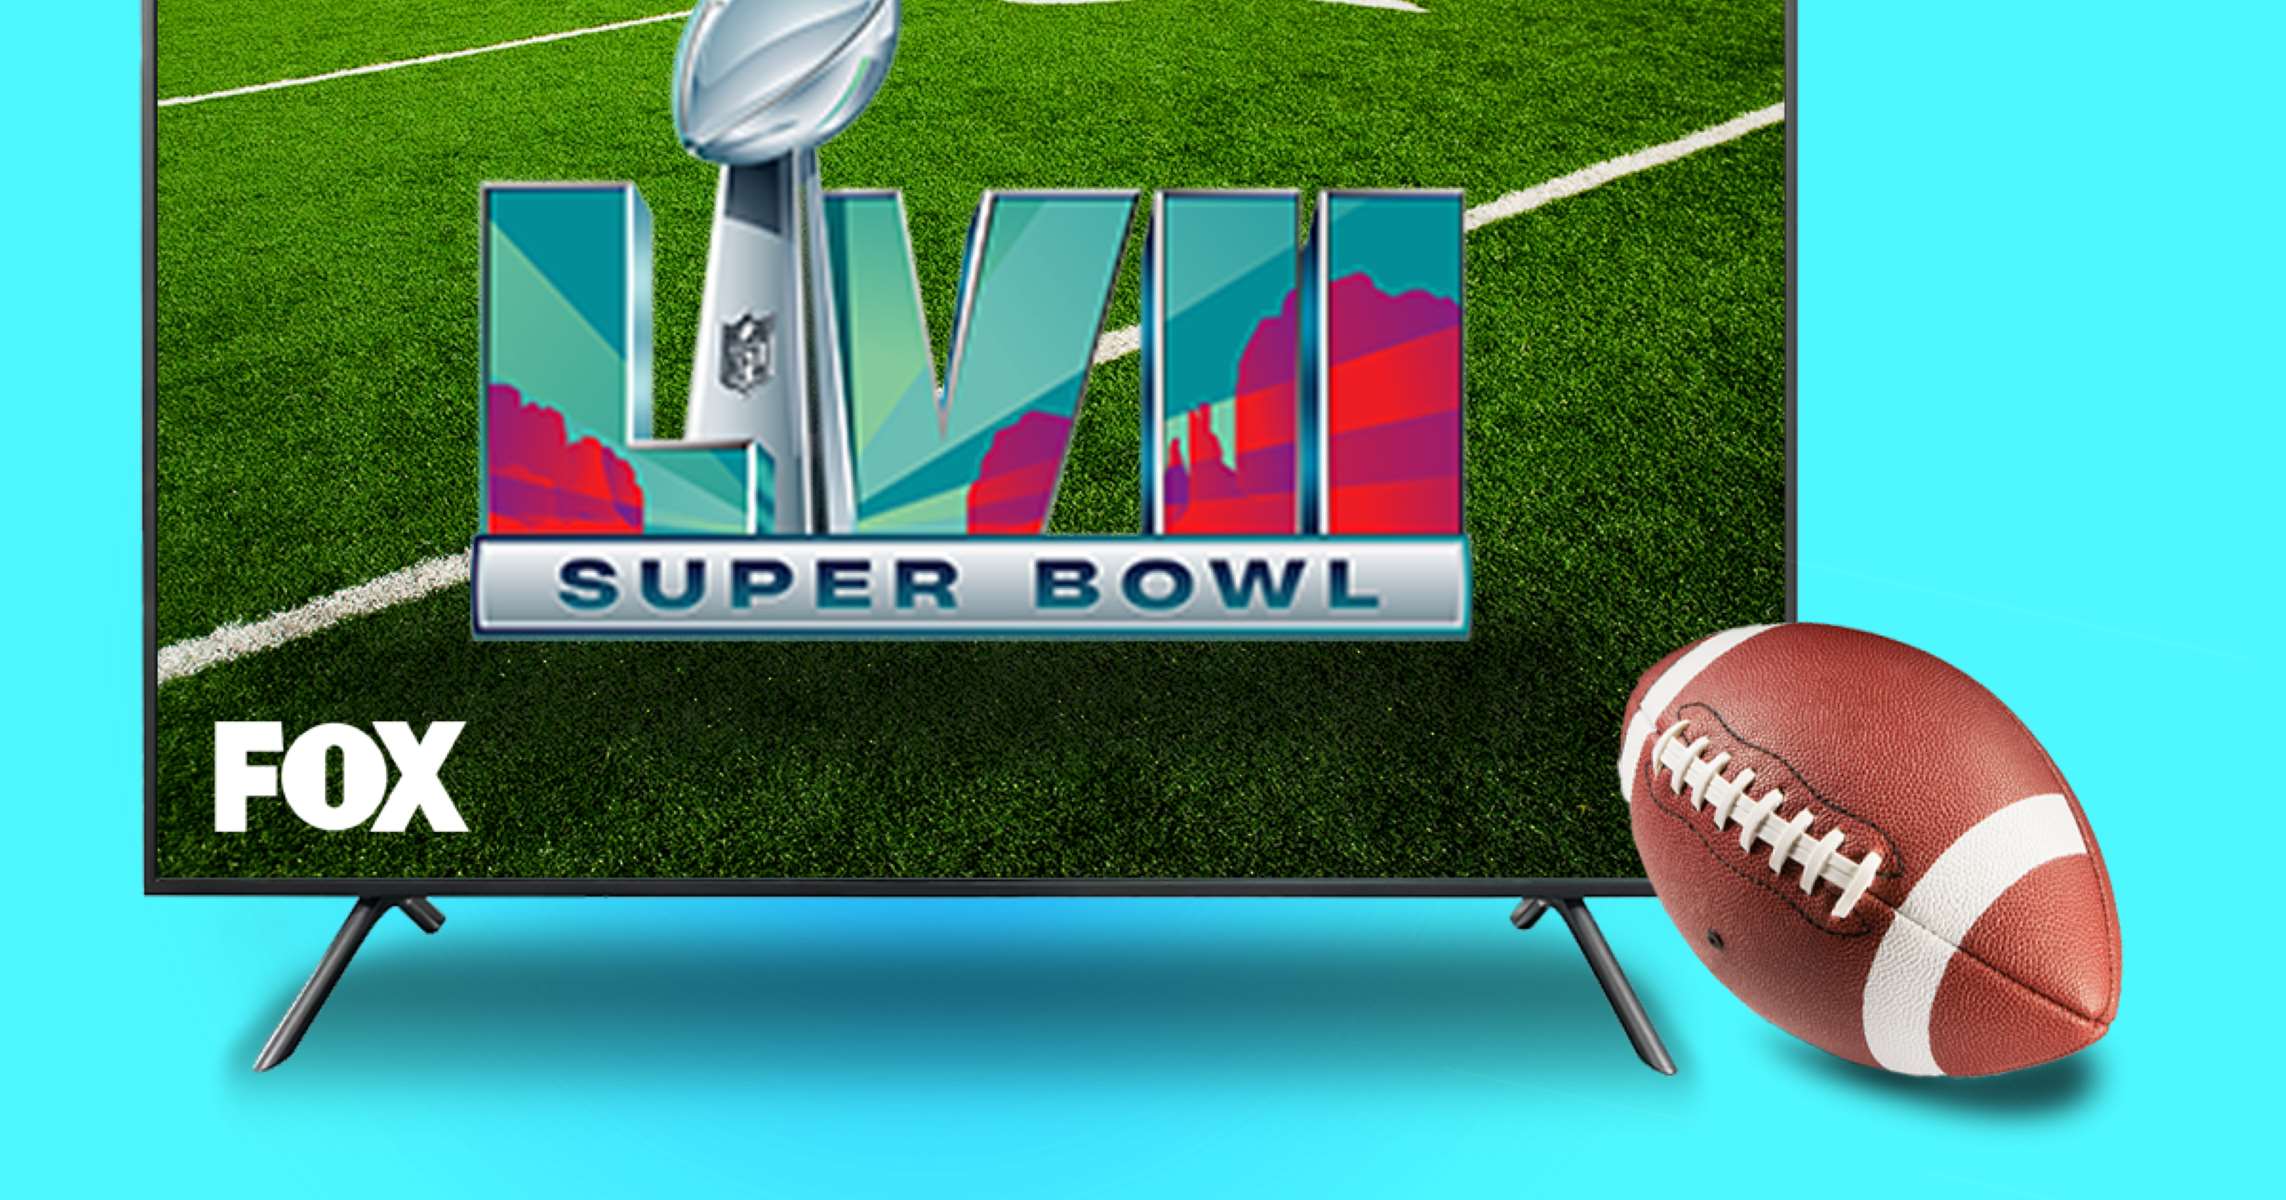 How To Watch Super Bowl On Fox